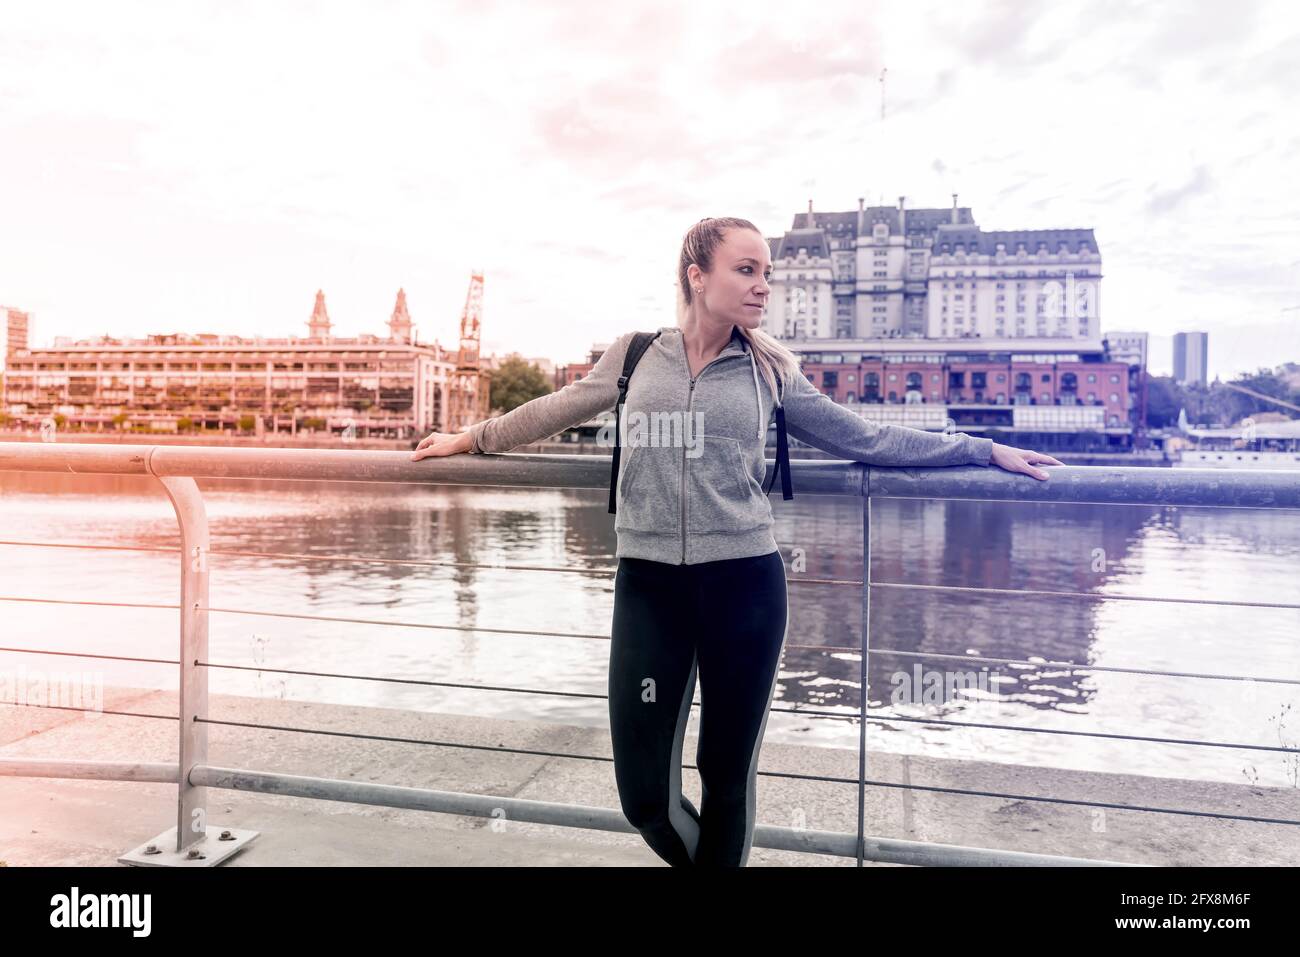 An athletic woman in a grey sweater standing next to the bridge railing. Stock Photo